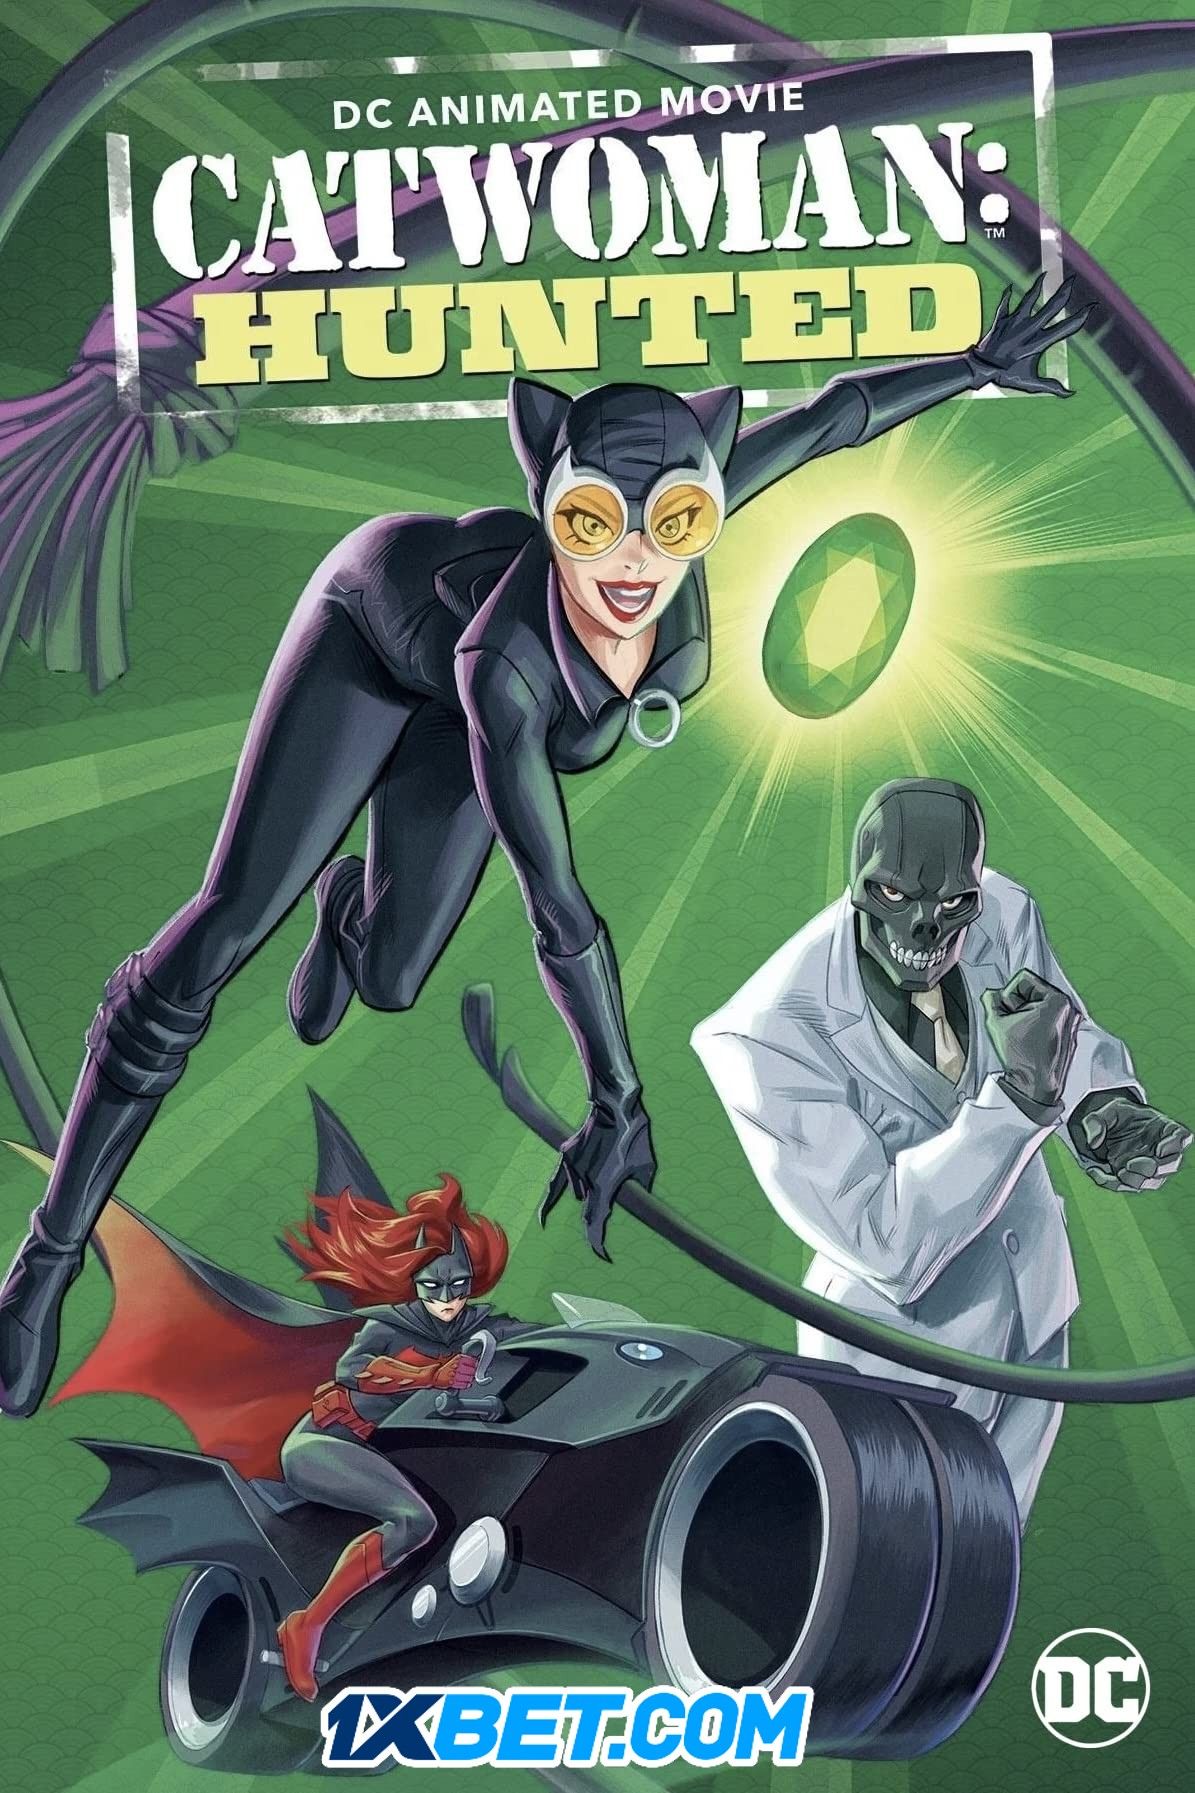 Catwoman: Hunted (2022) Bengali (Voice Over) Dubbed BluRay download full movie